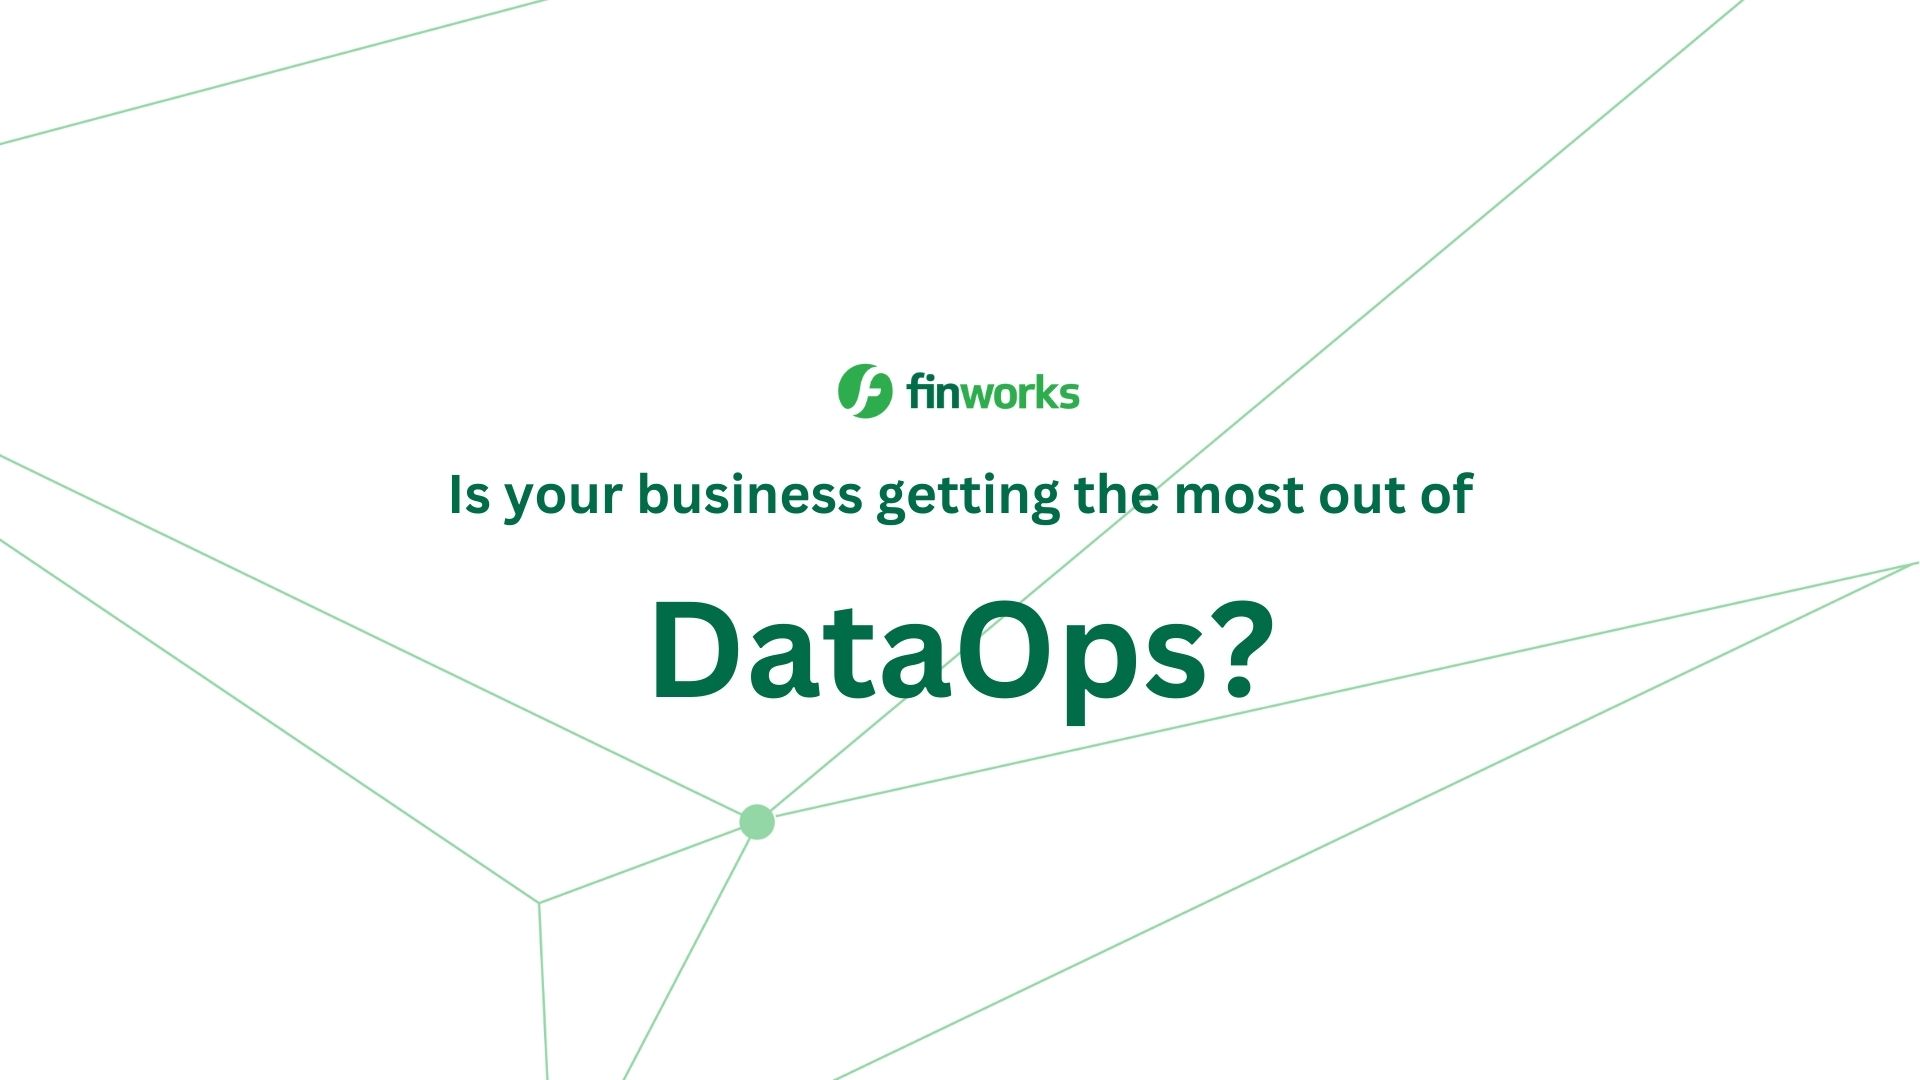 What is DataOps and what are the benefits for your business?